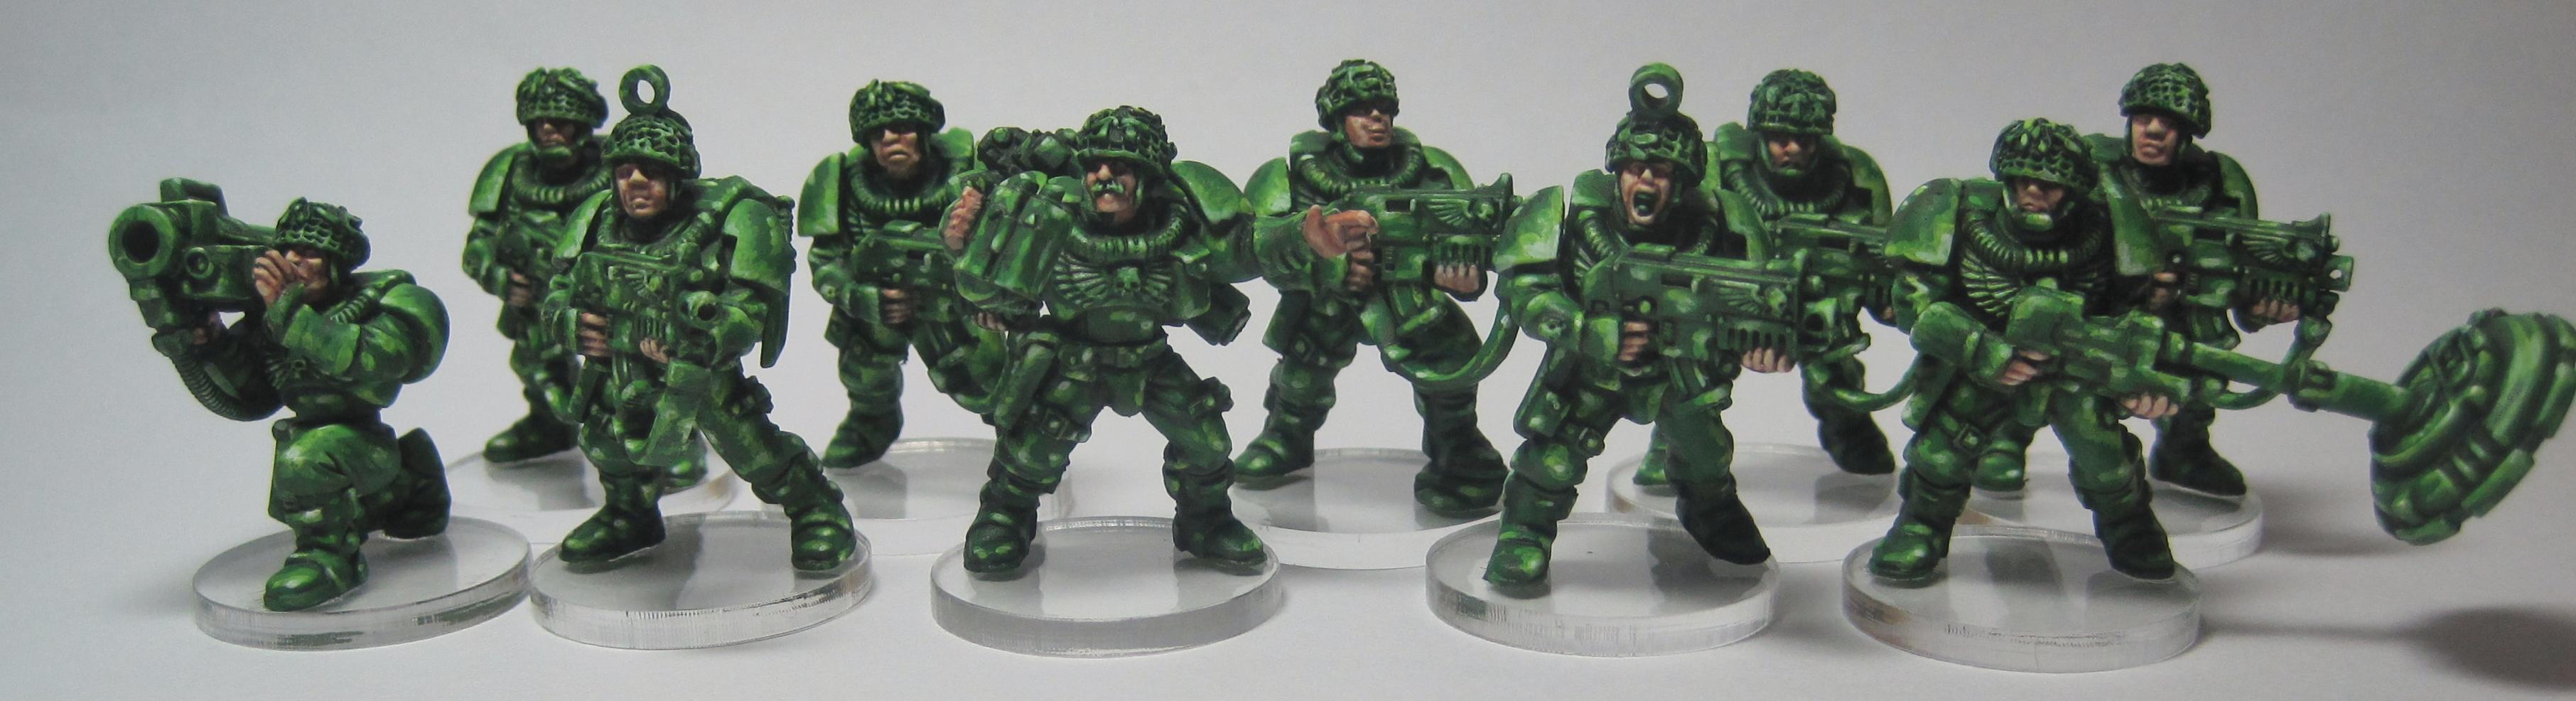 Army Men, Fun, Scouts, Space Marine Scouts, Toy Story, Warhammer 40,000